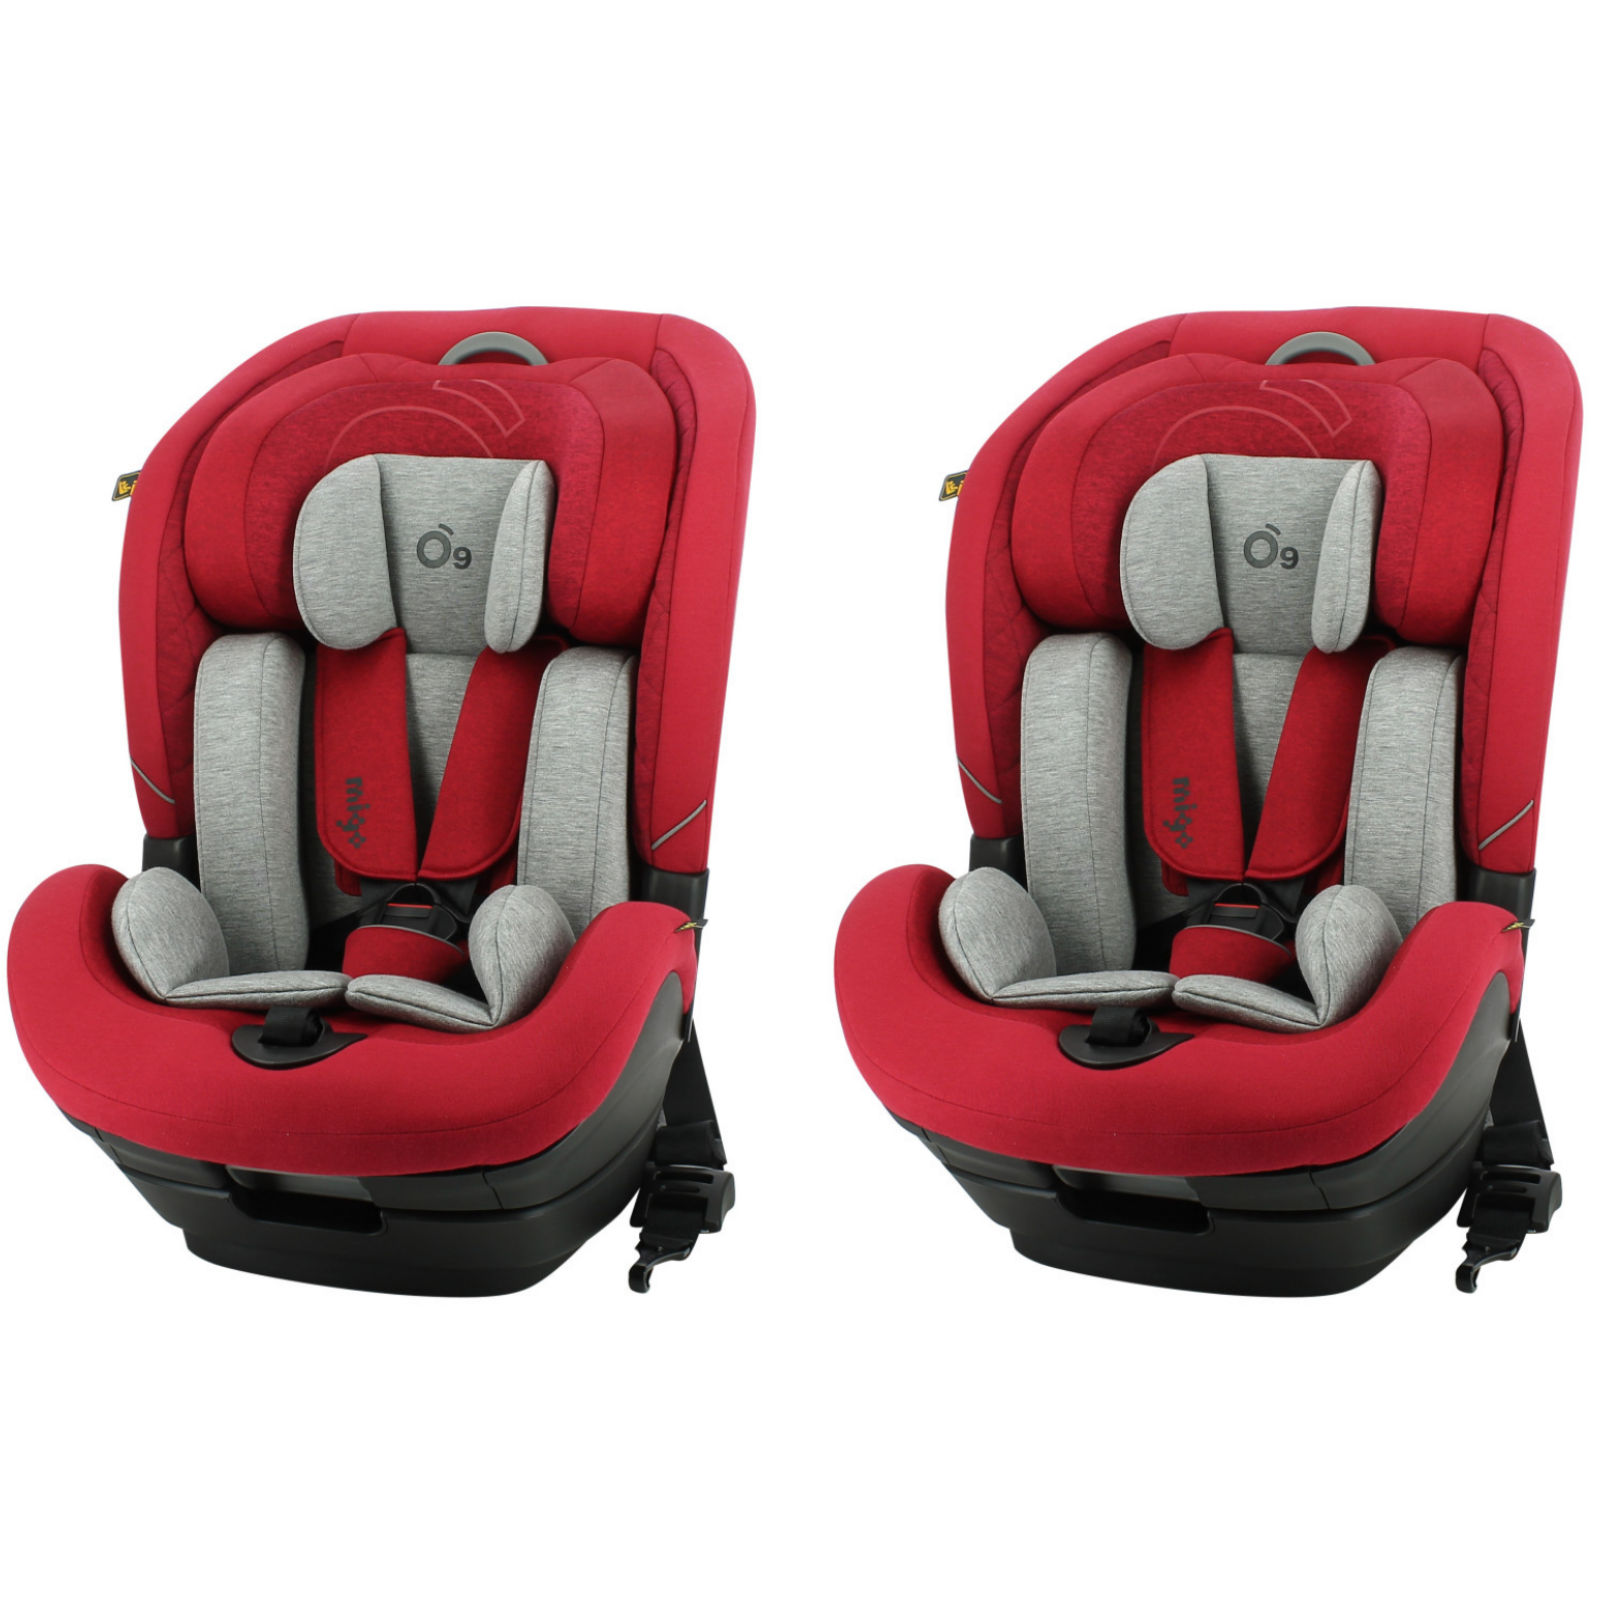 Migo Nado O9 Luxury i-Size Group 1/2/3 Isofix Car Seat  (2 Pack) - Red (15 Months-12 Years)